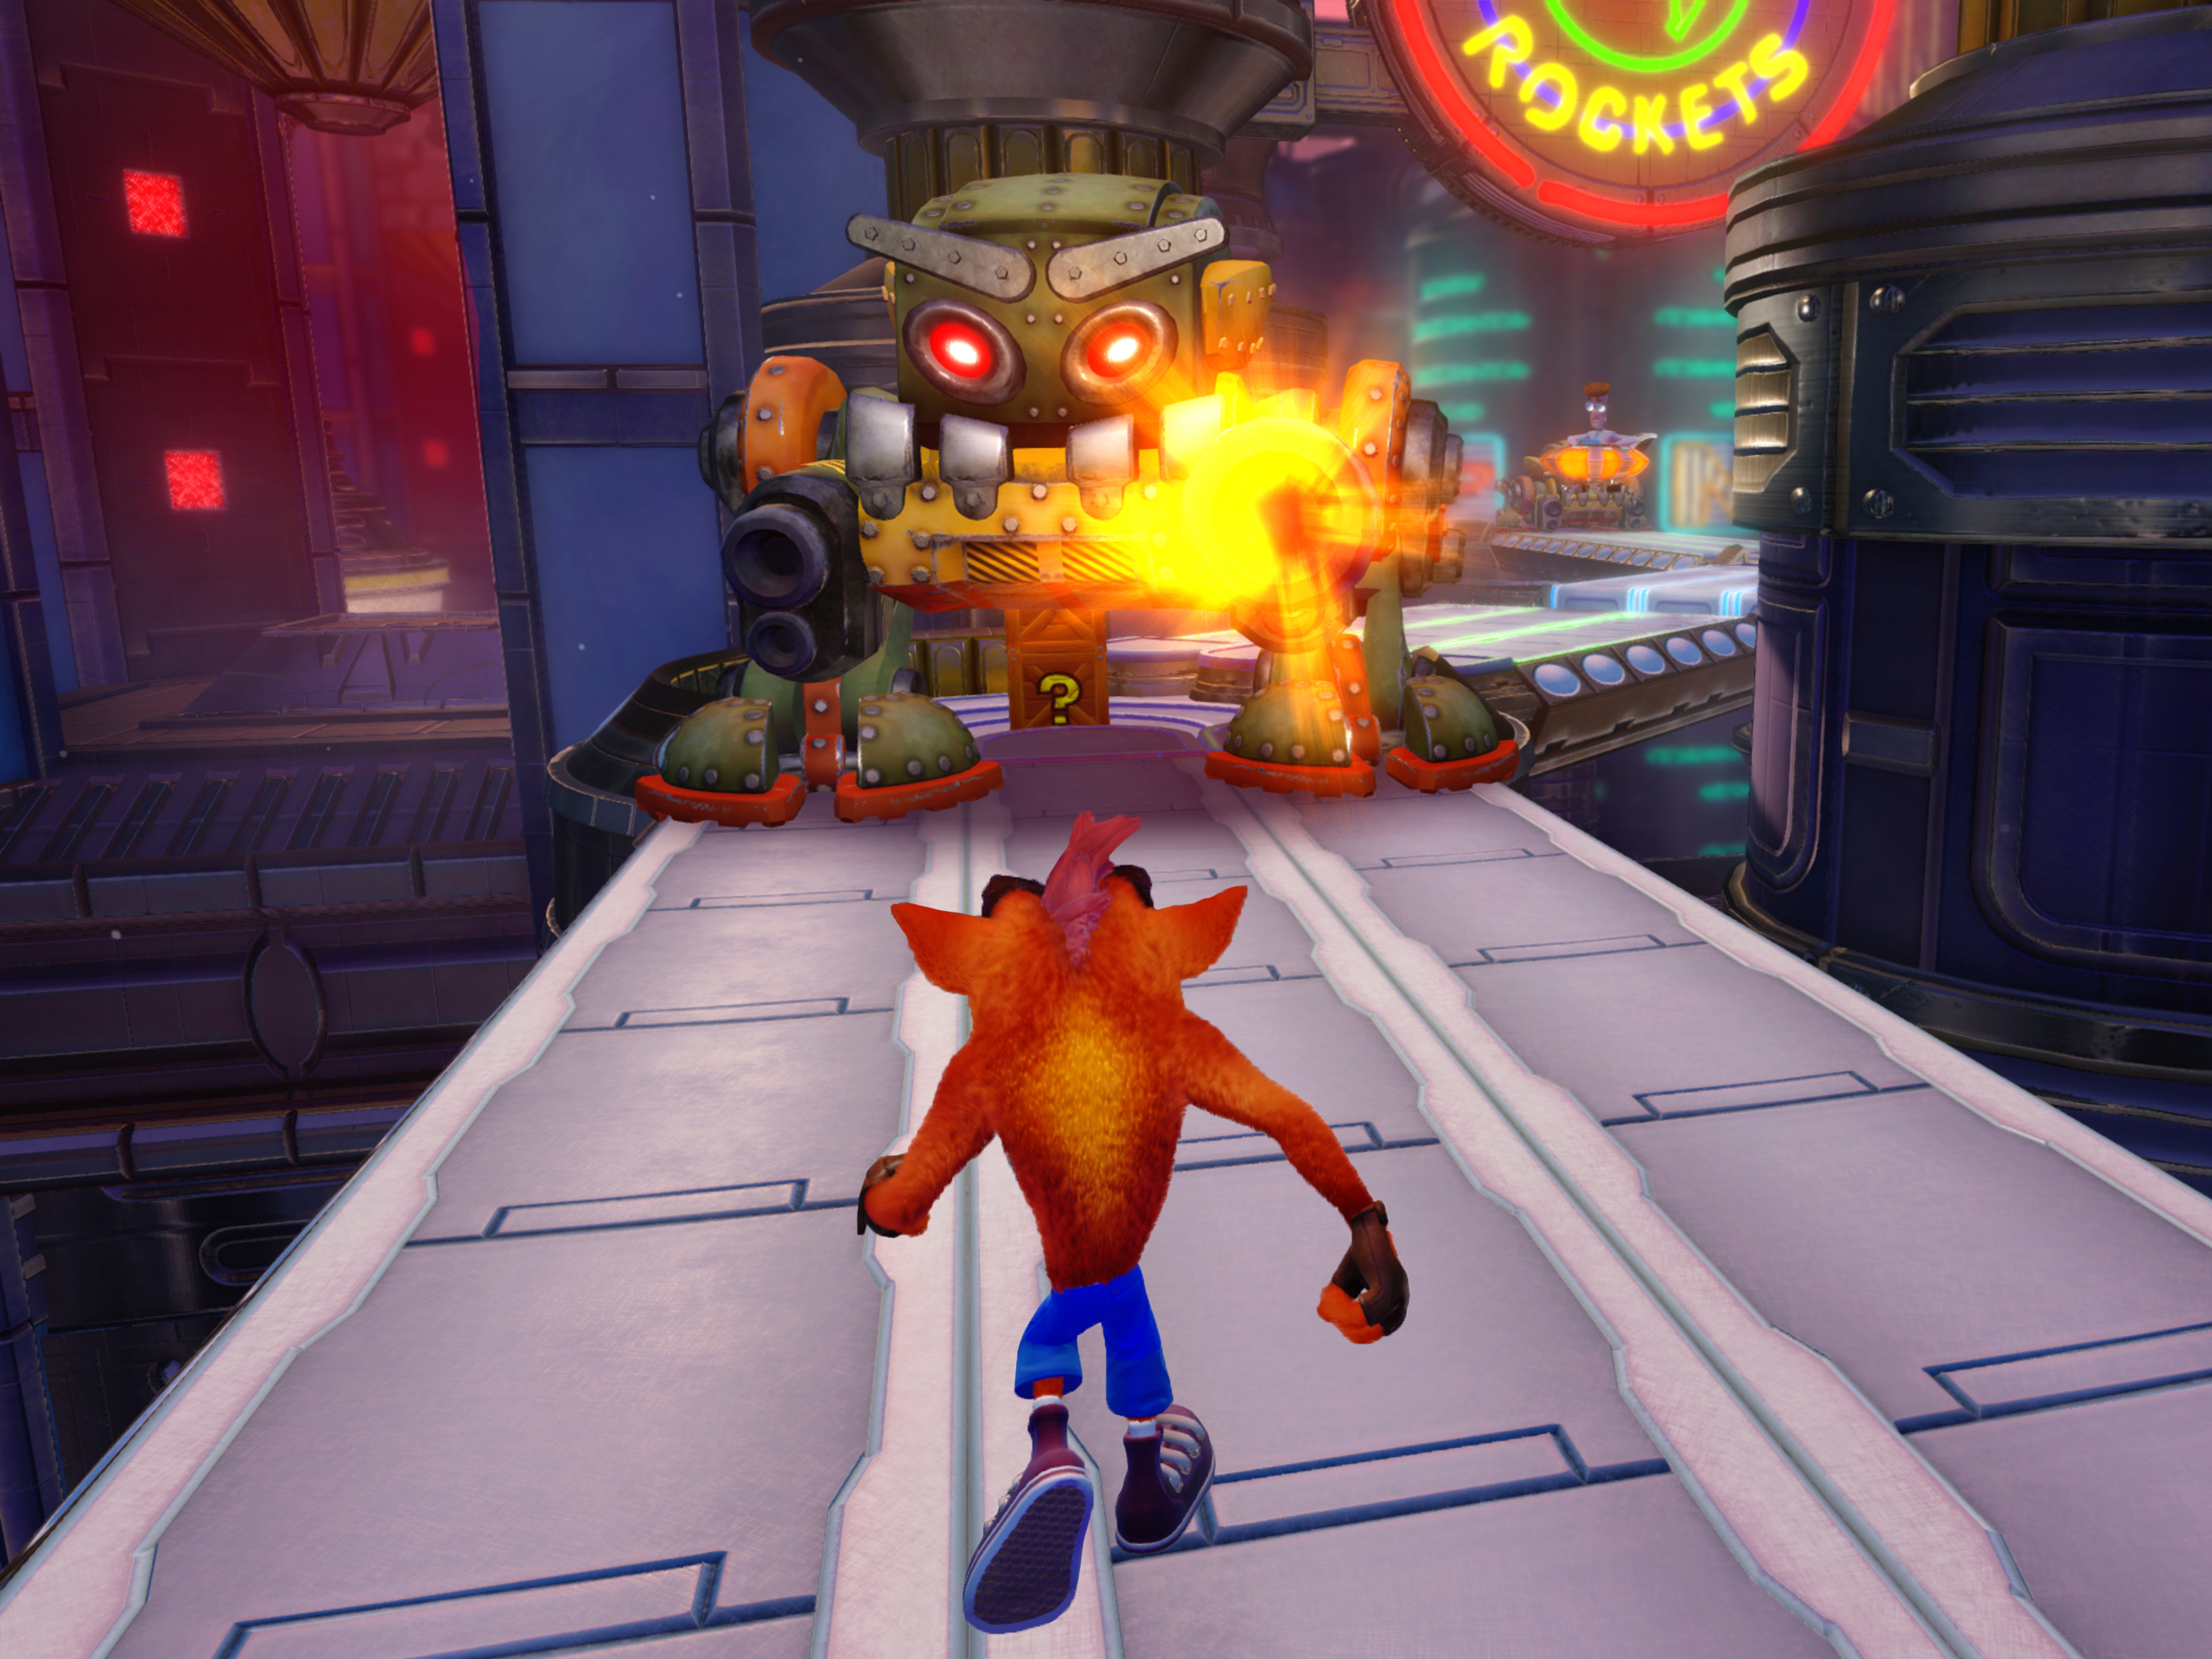 Crash Bandicoot N. Sane Trilogy: The same game, only different